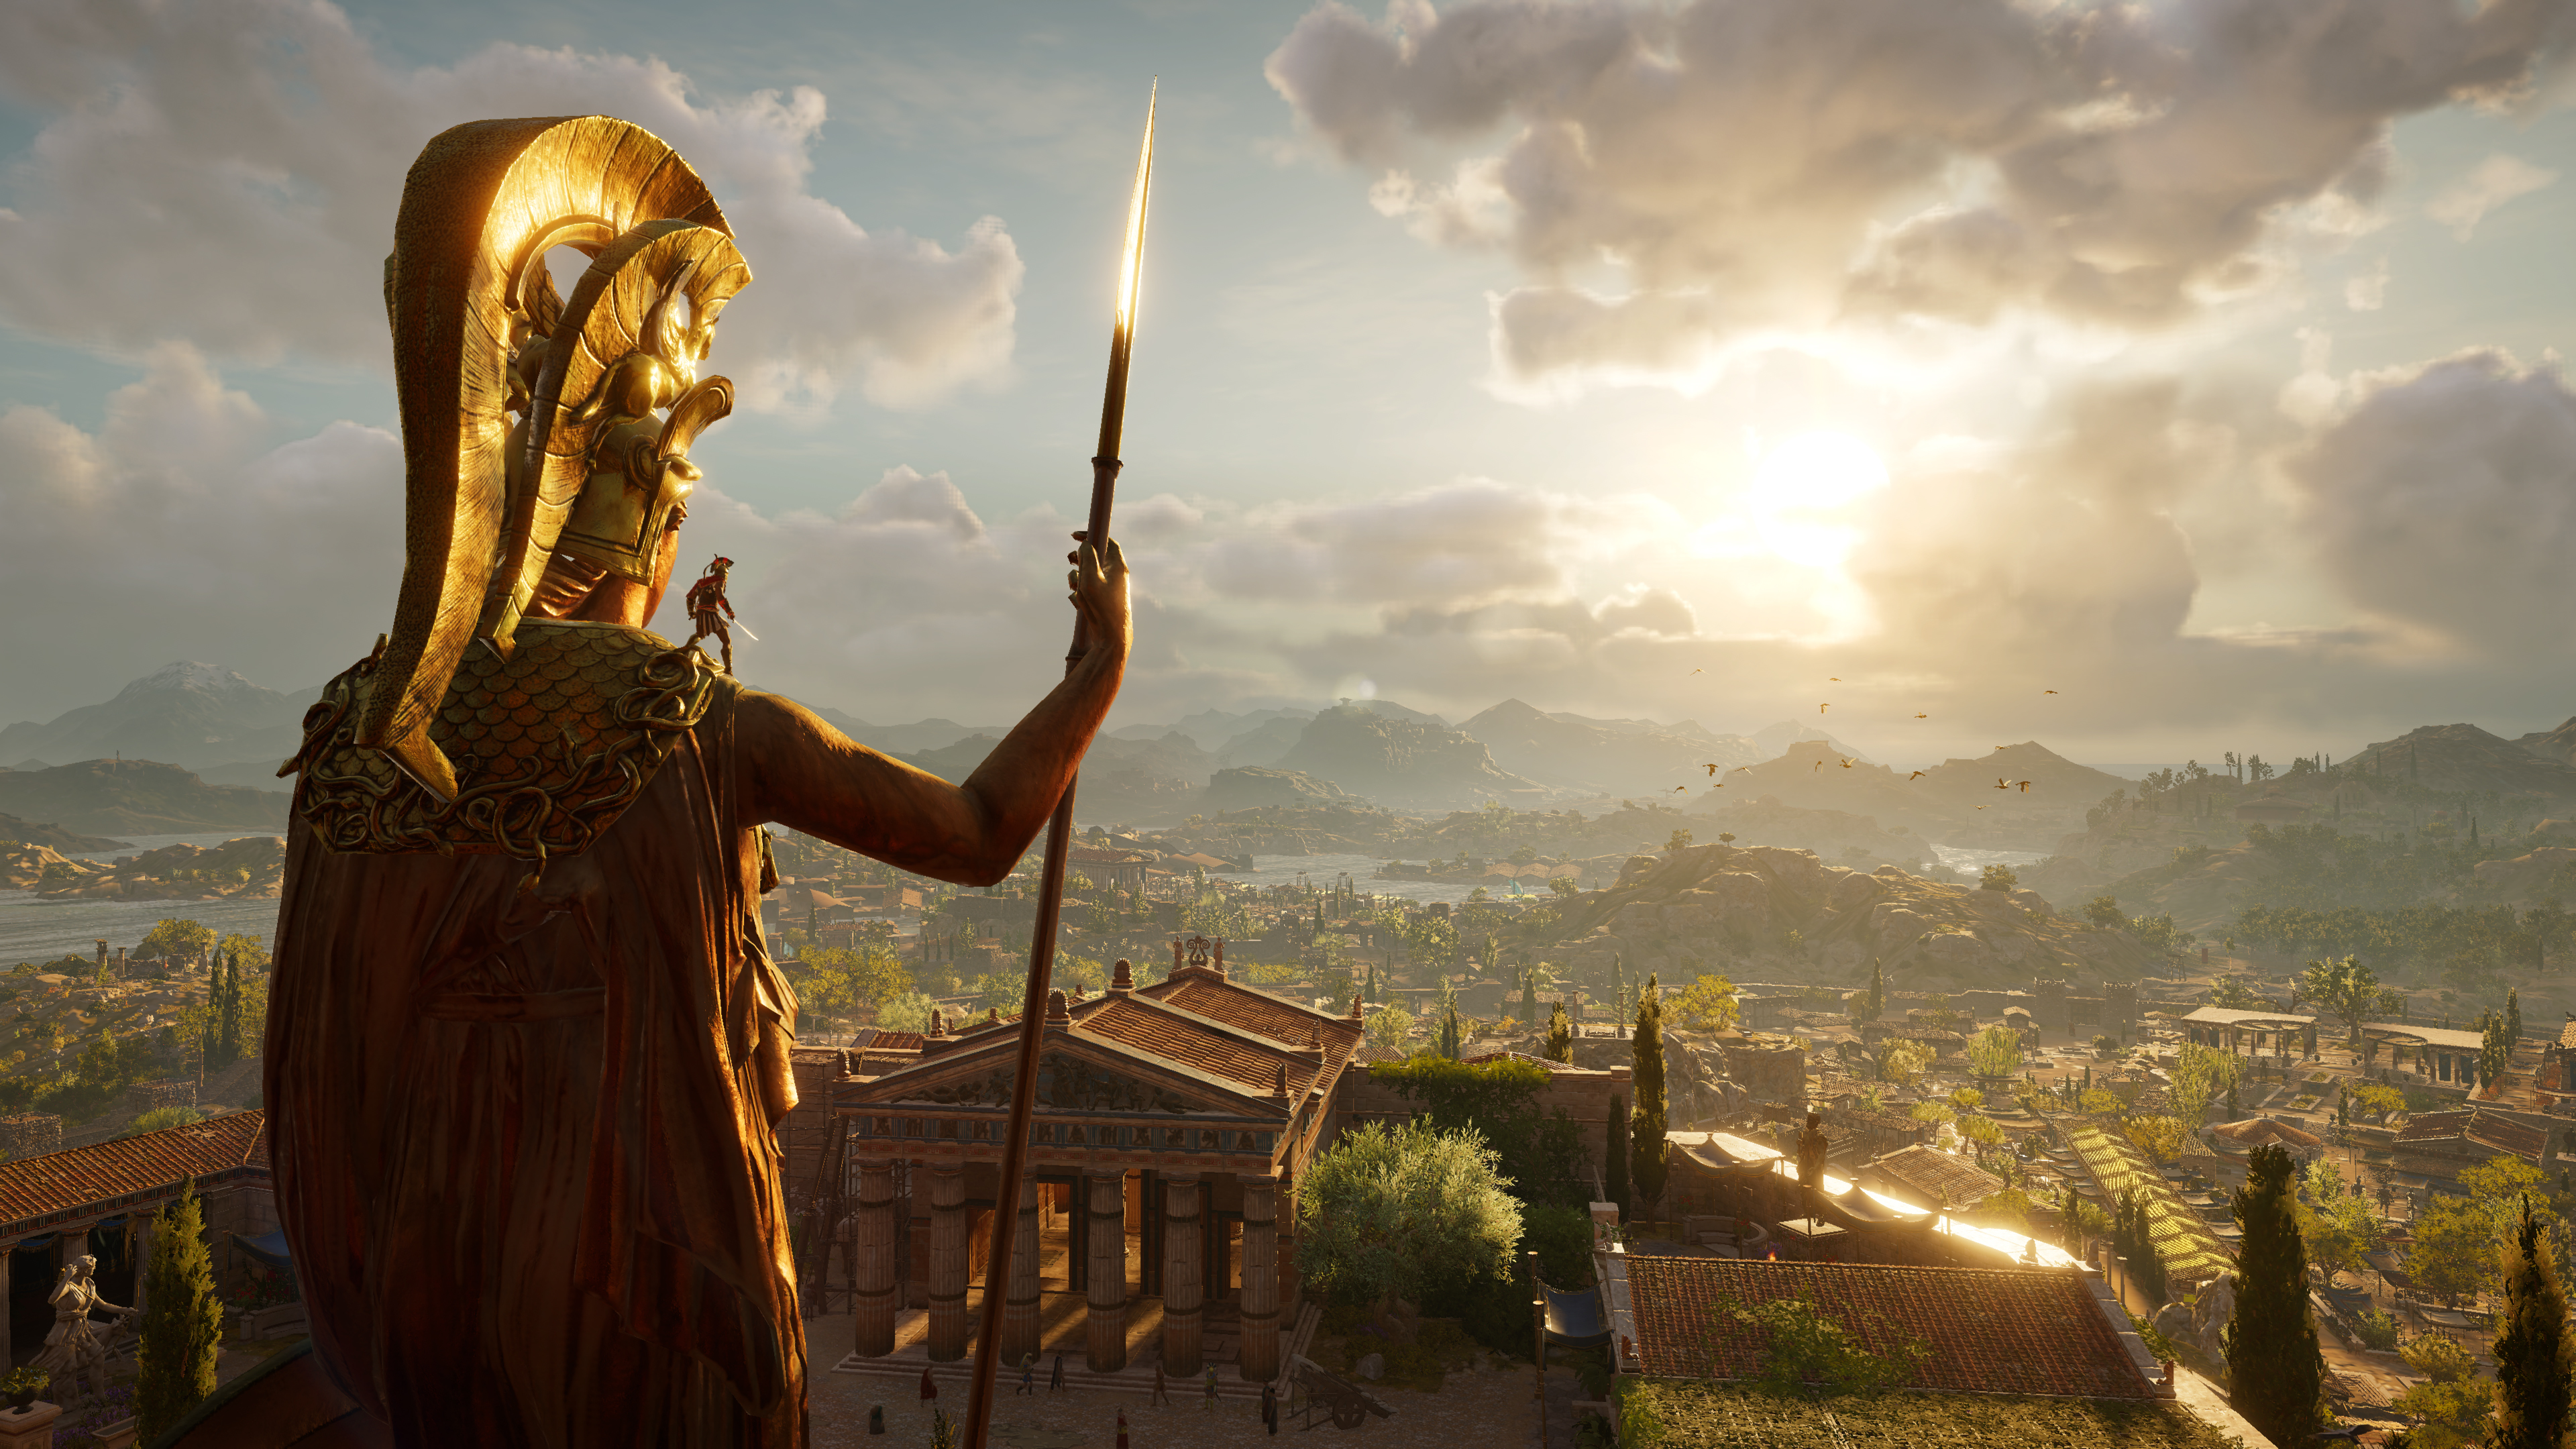 Assassin's Creed Odyssey Preview - Hands-On in a Battle For Conquest